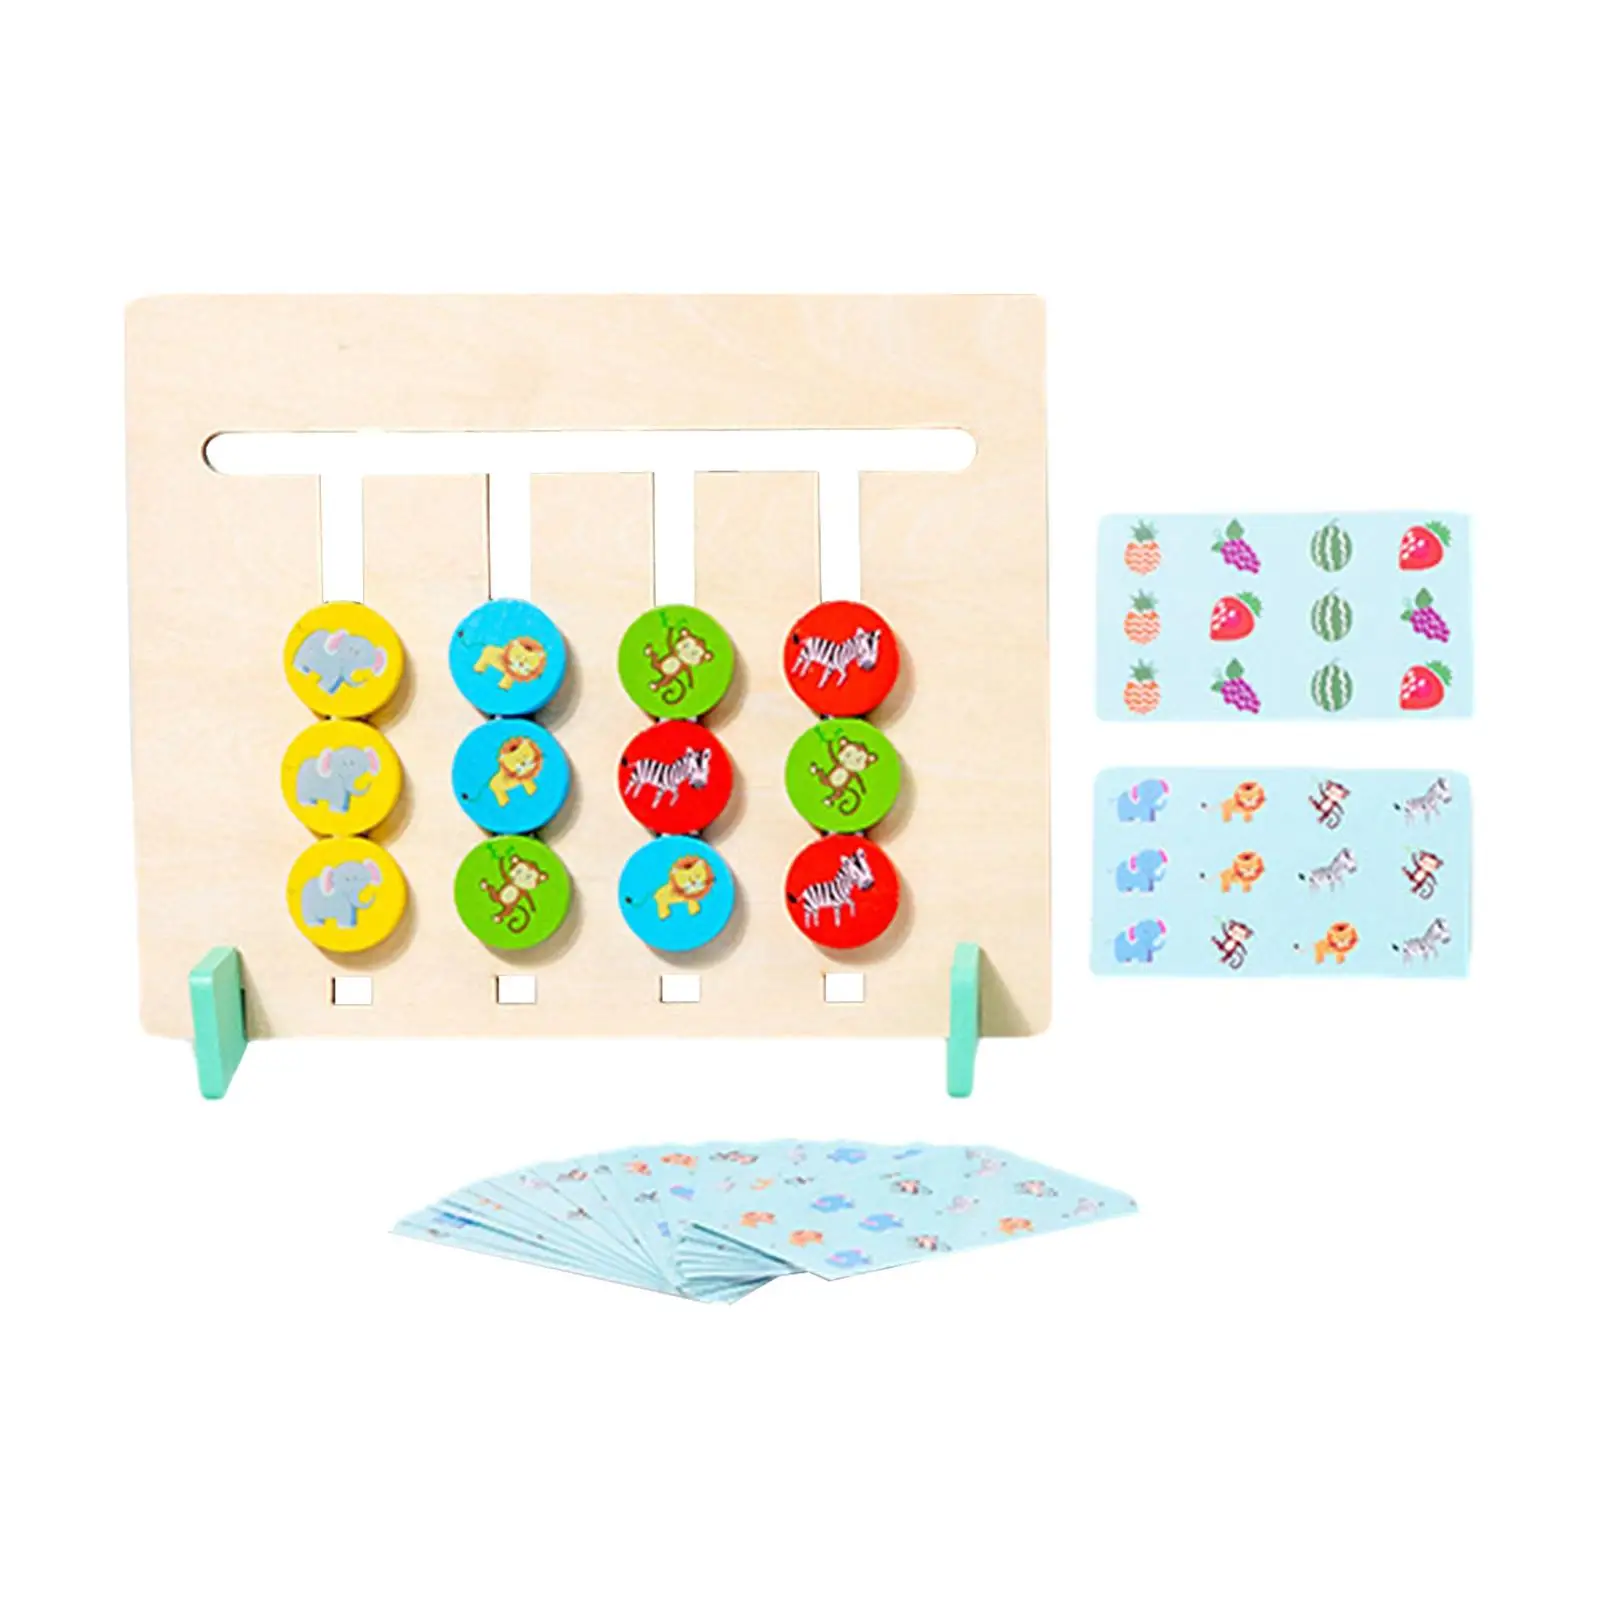 Color Matching Slide Puzzle Two Player Montessori Toys Board Games for Boys Girls Kids Age 3 4 5 6 7 Years Old Child Party Favor